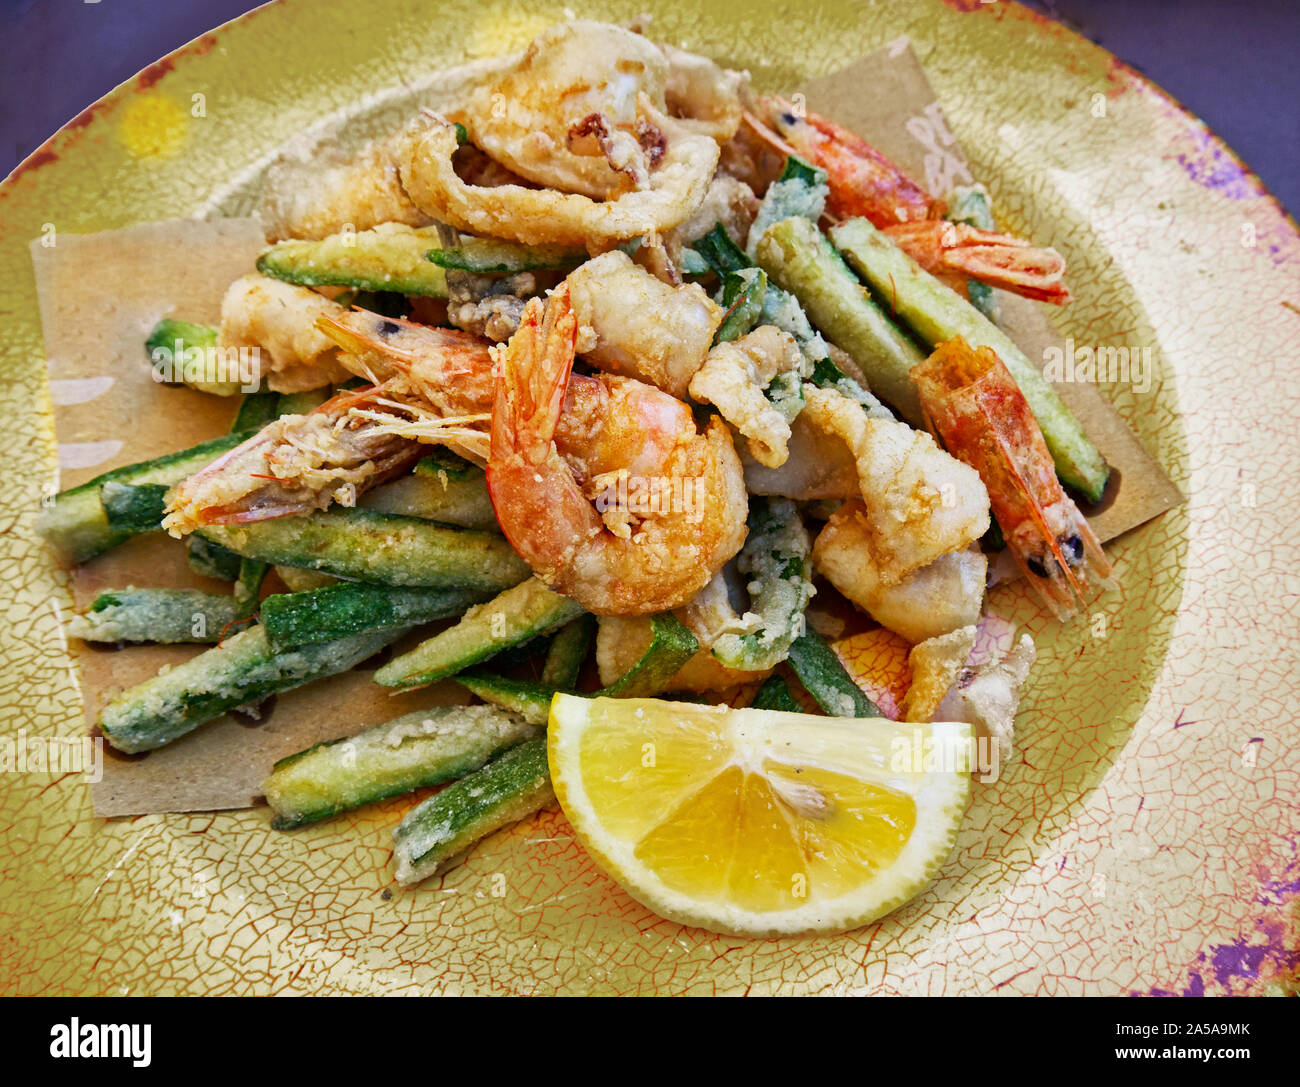 photography Alamy hi-res images - Fritto and misto stock